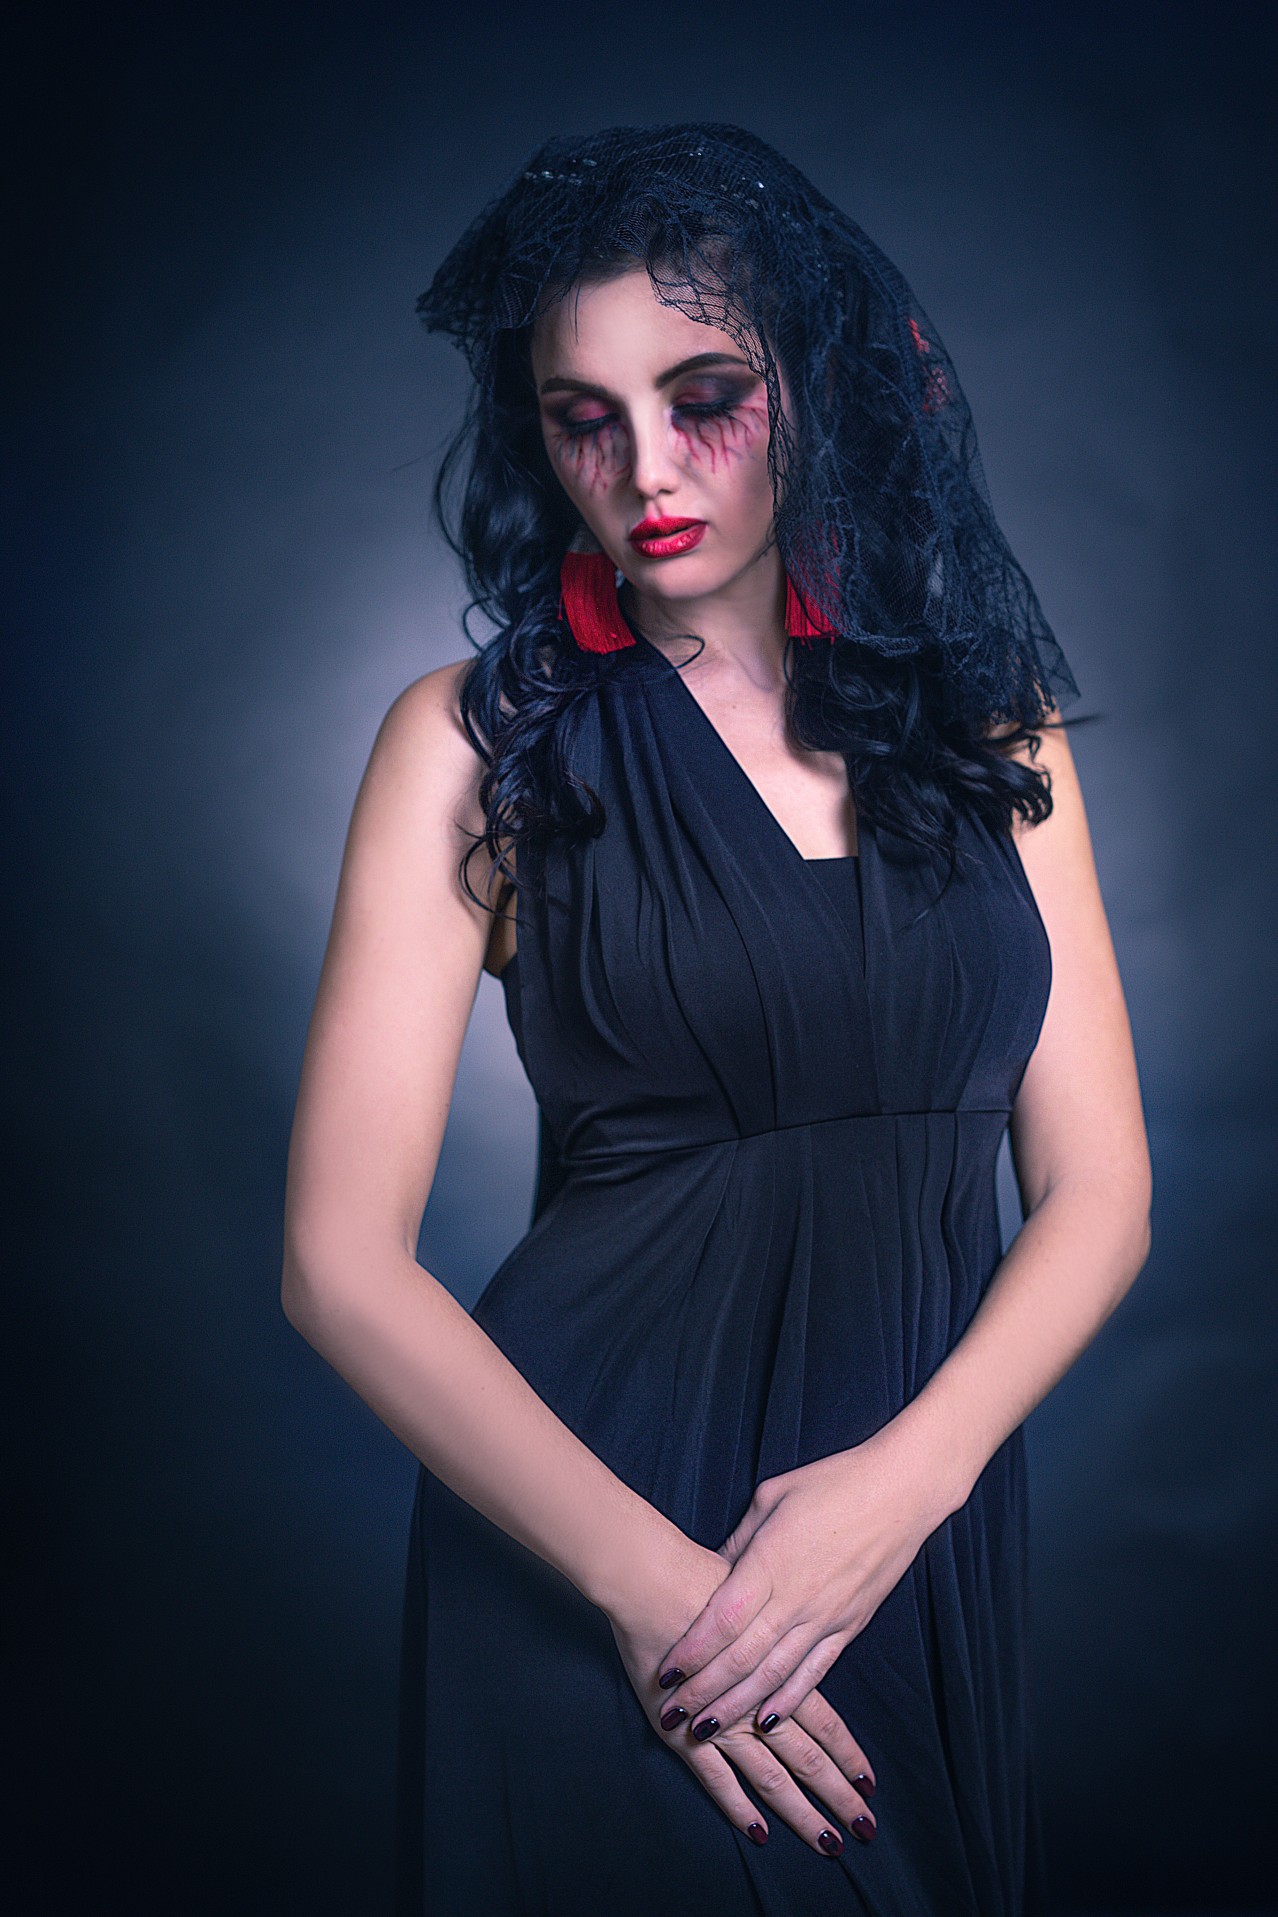 A Young Brunette Woman with Halloween Makeup